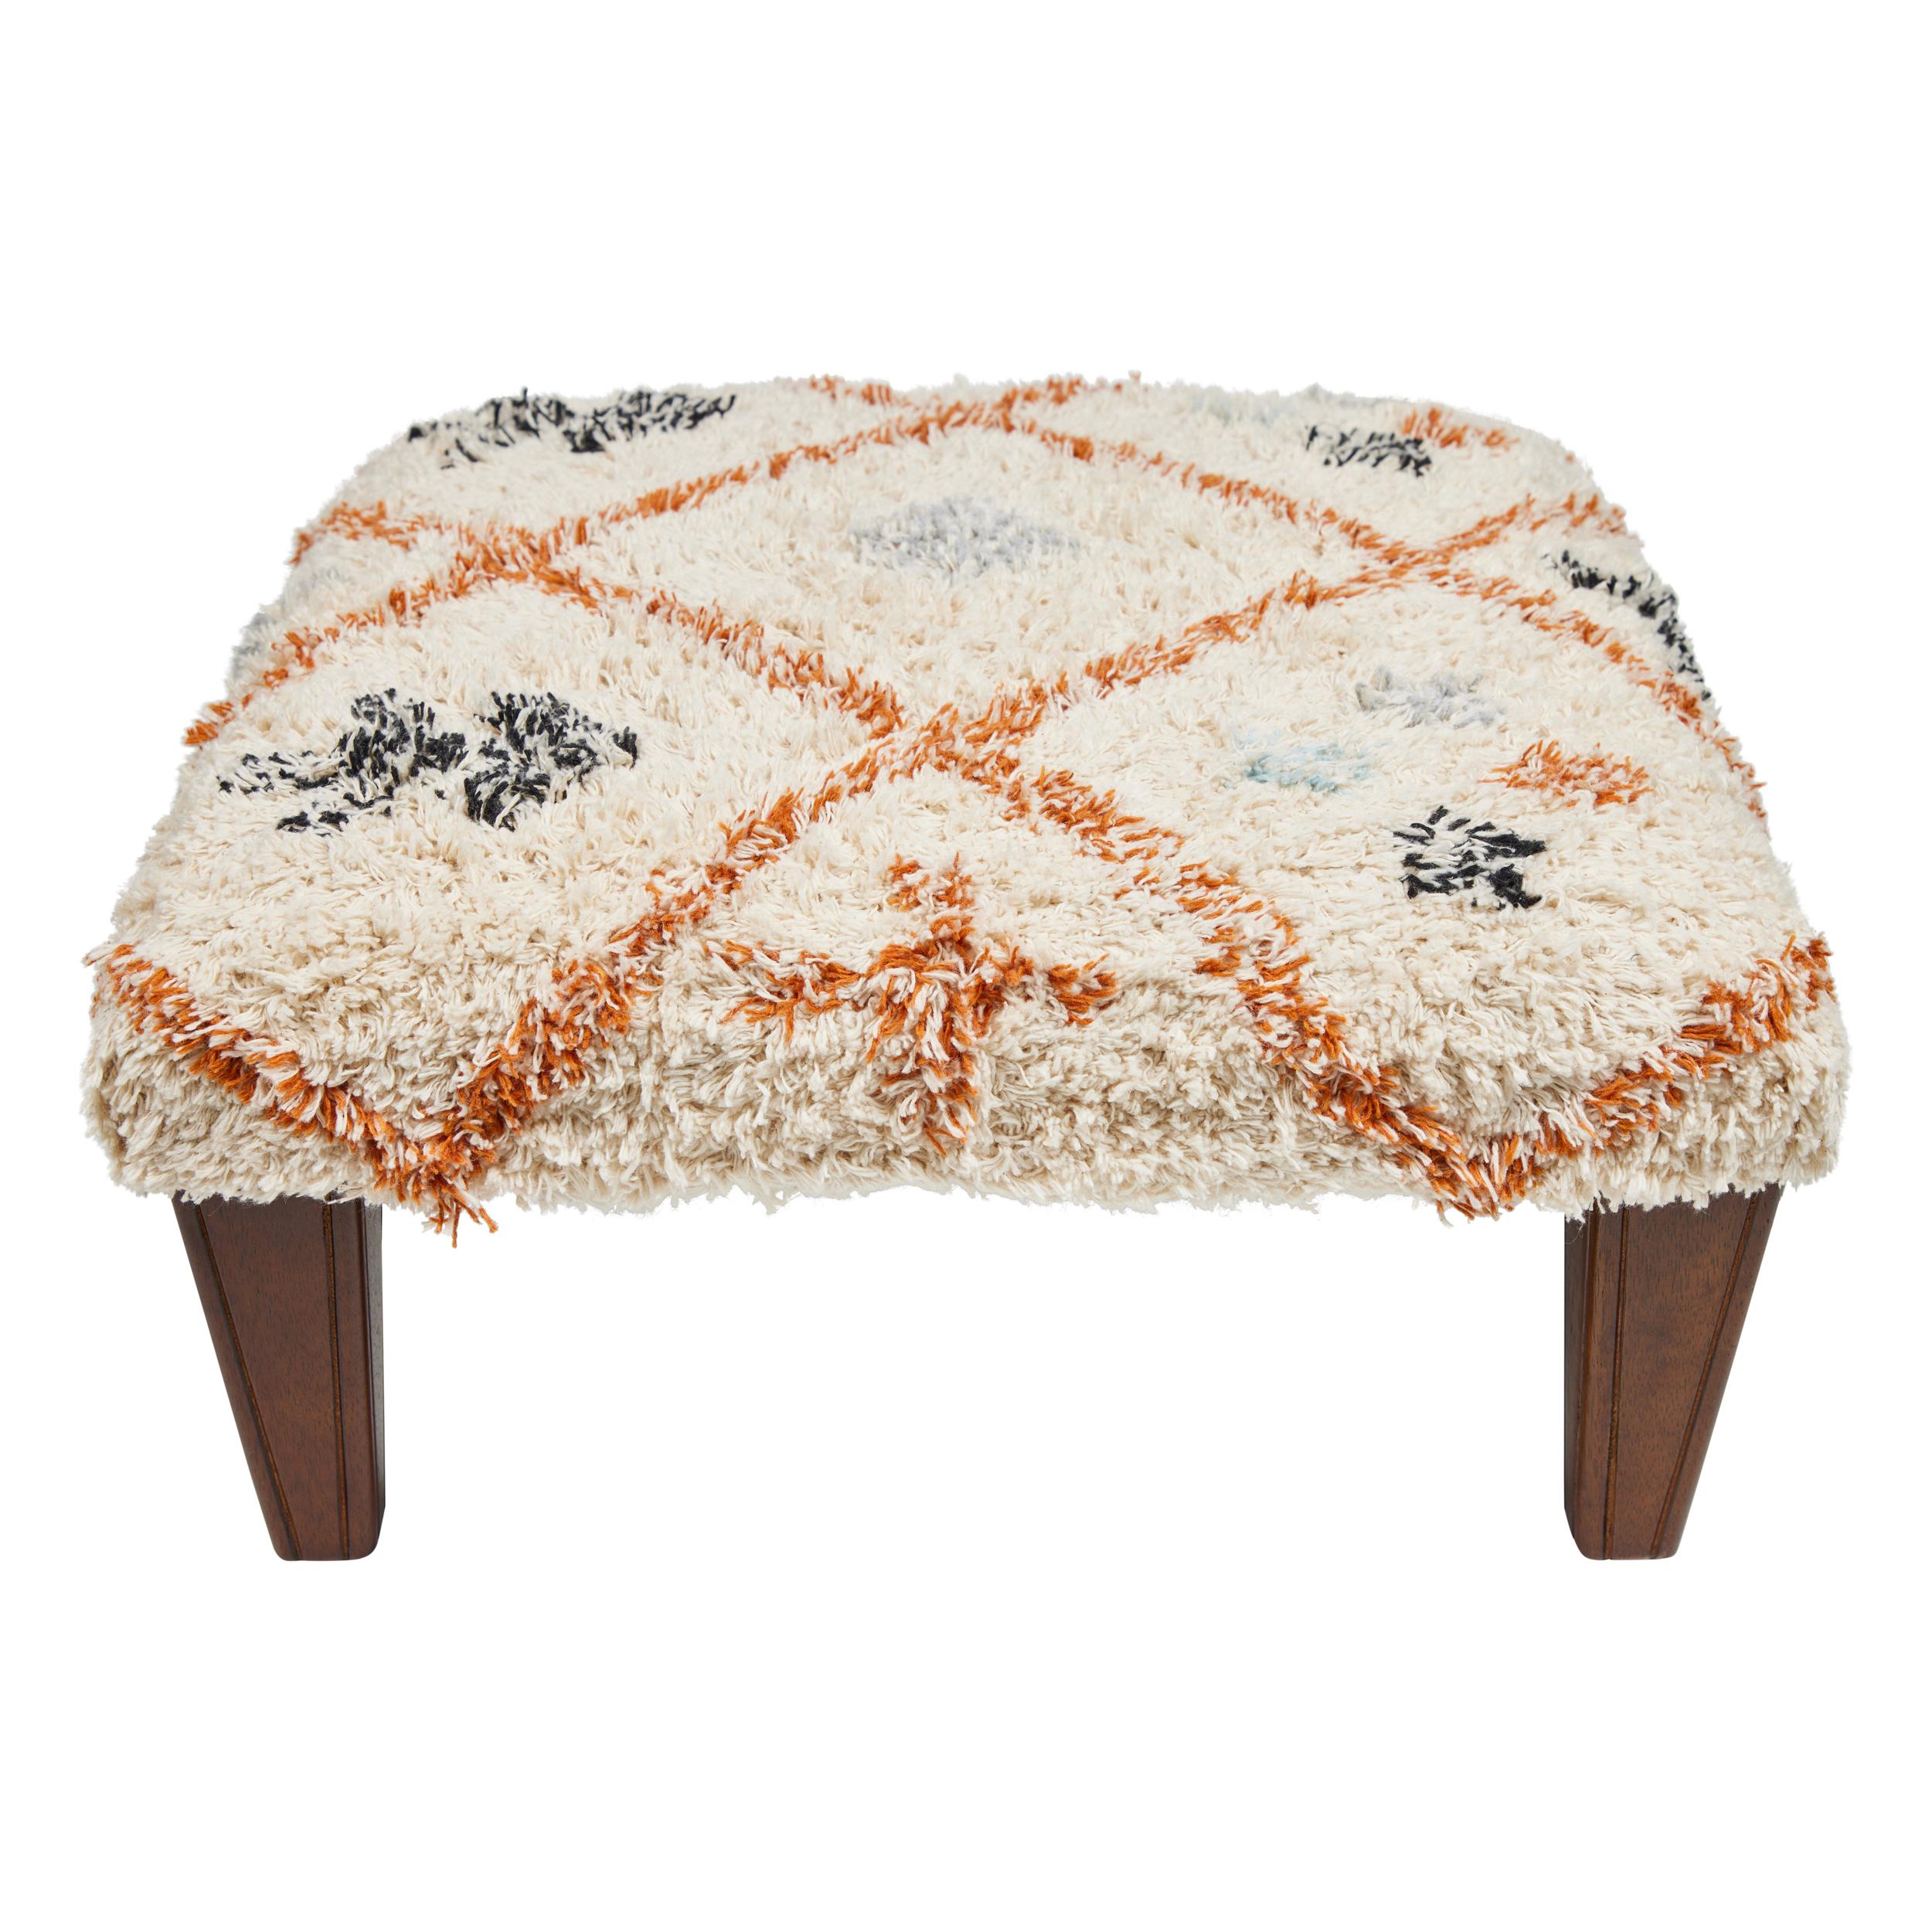 Custom Footstool with New Legs and Cotton Textile from India Top